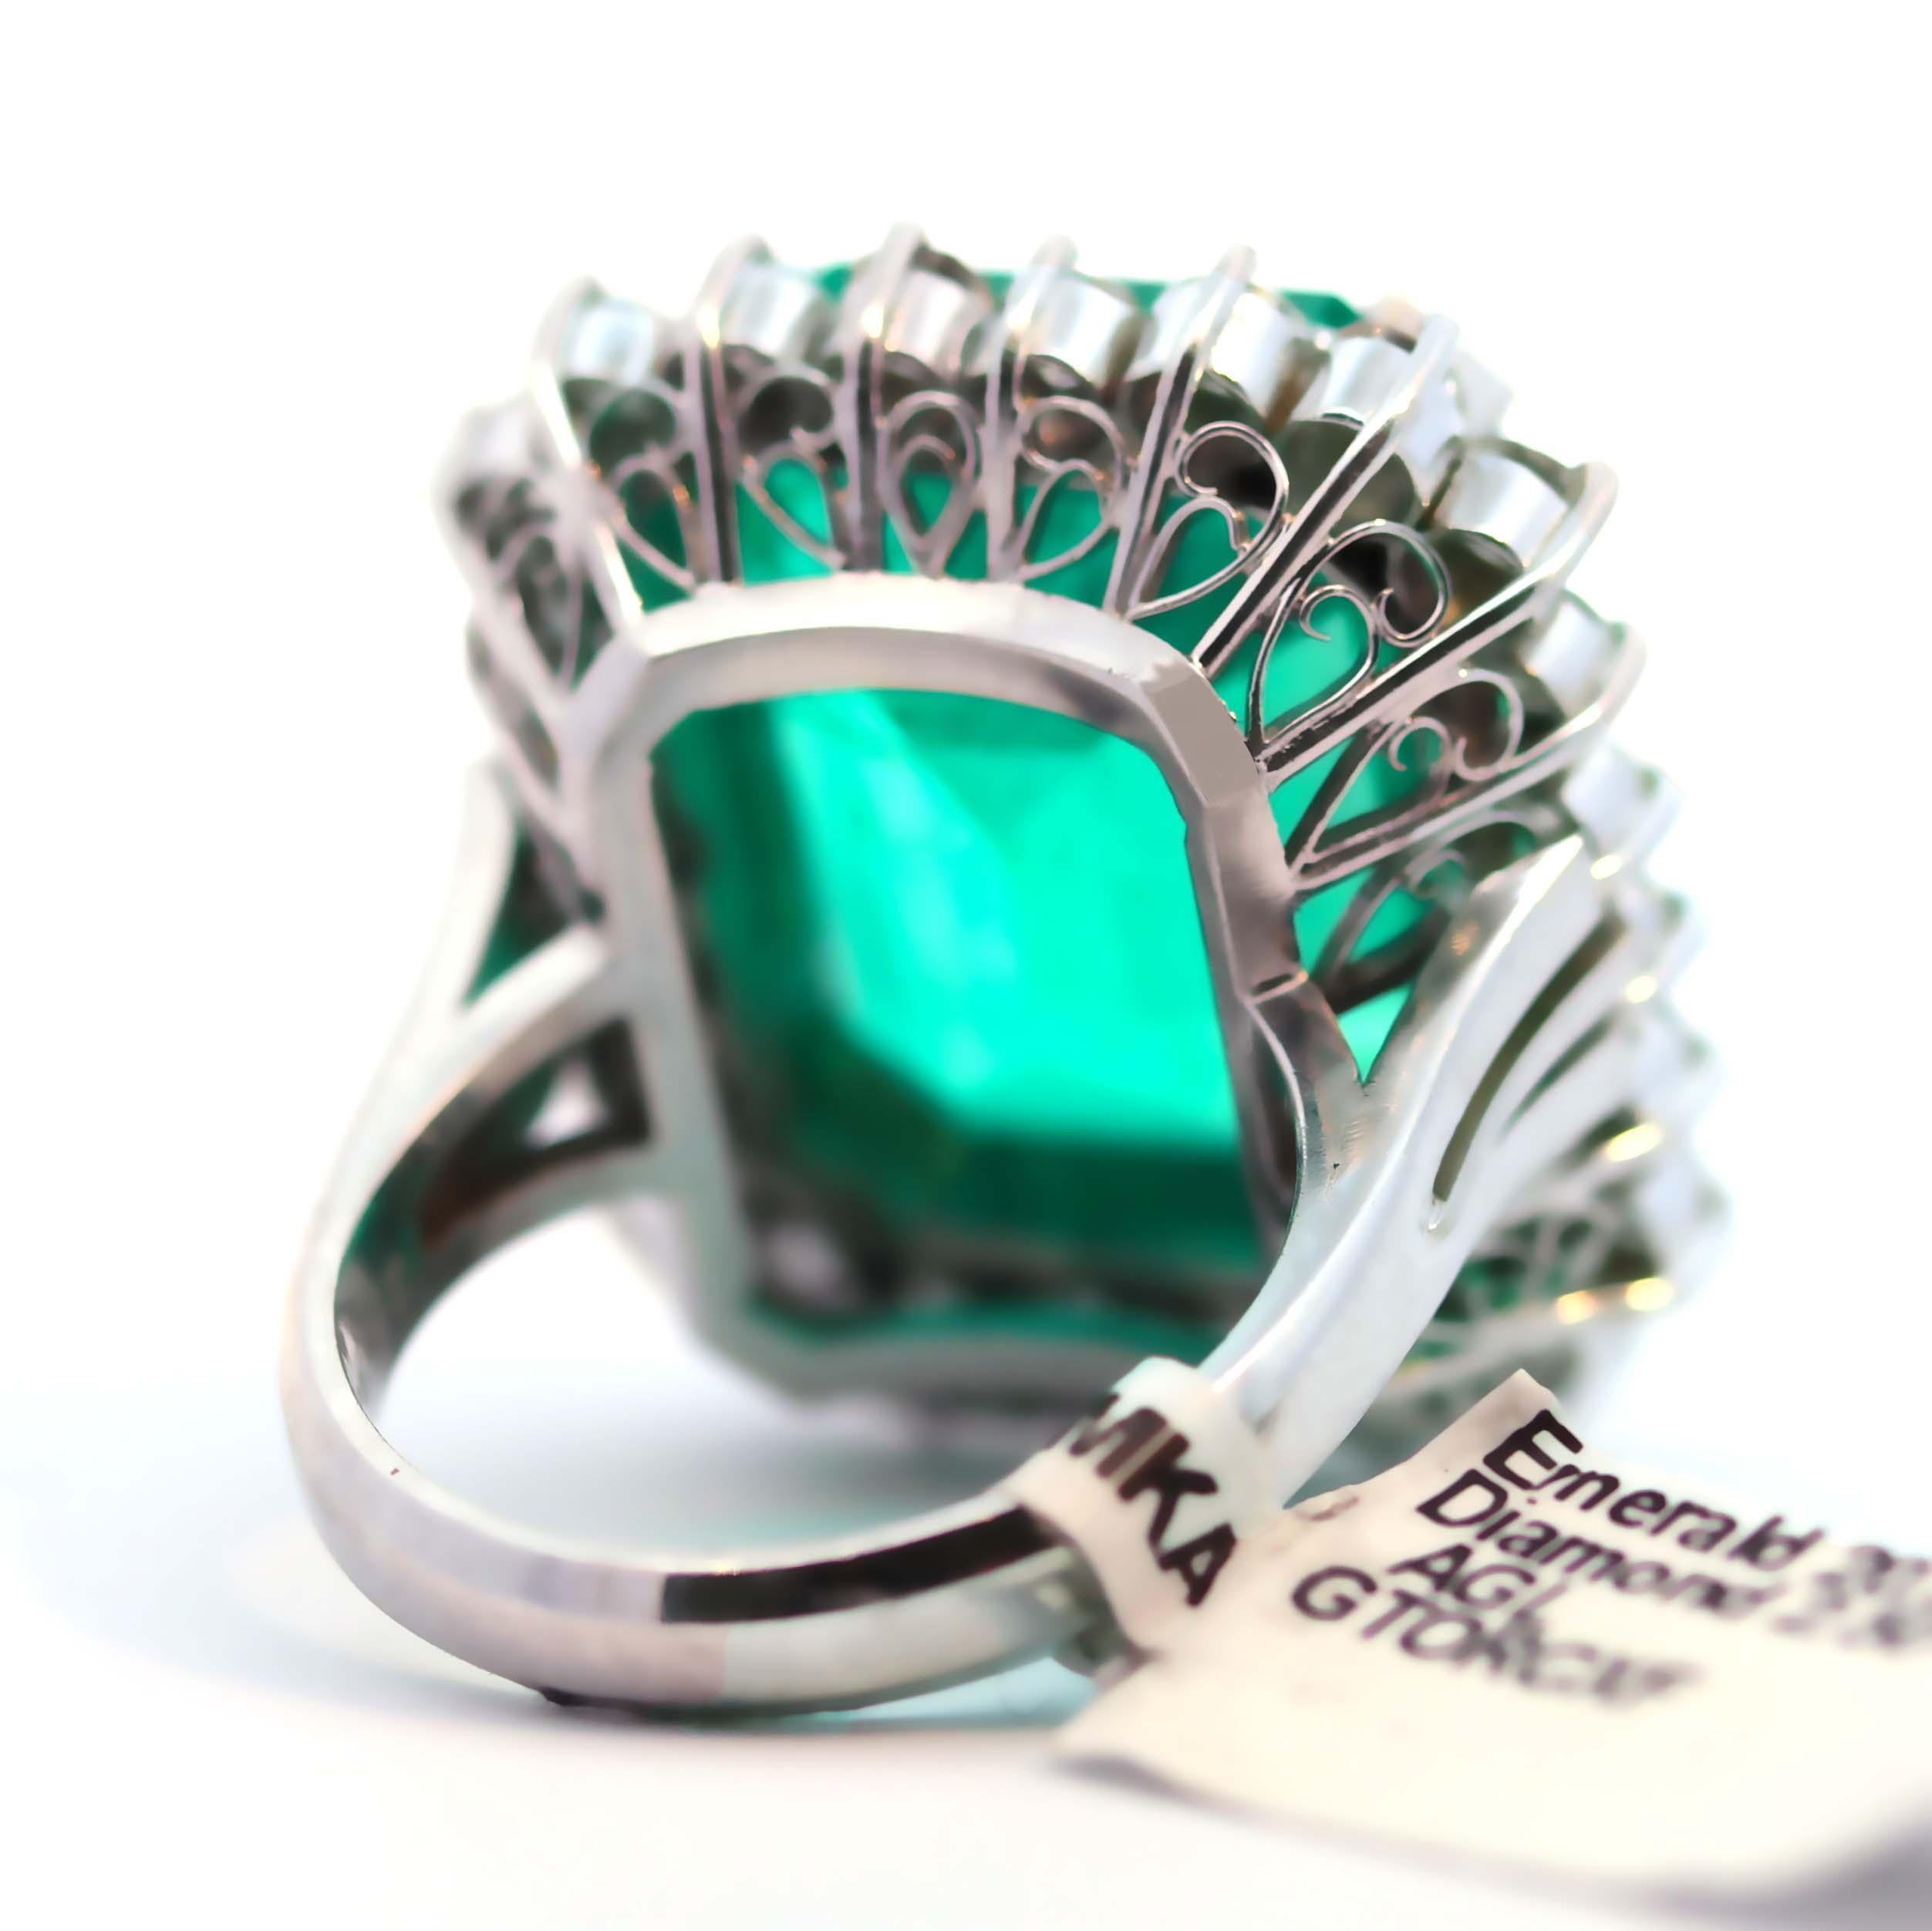 AGL Certified 20.95 carat Colombian Minor Emerald and diamond Cocktail ring. At the center of this ring is a Vibrant, bold, vivid green 20.95-carat emerald-cut emerald, certified by AGL. The use of an emerald cut for the main gem is noteworthy, as